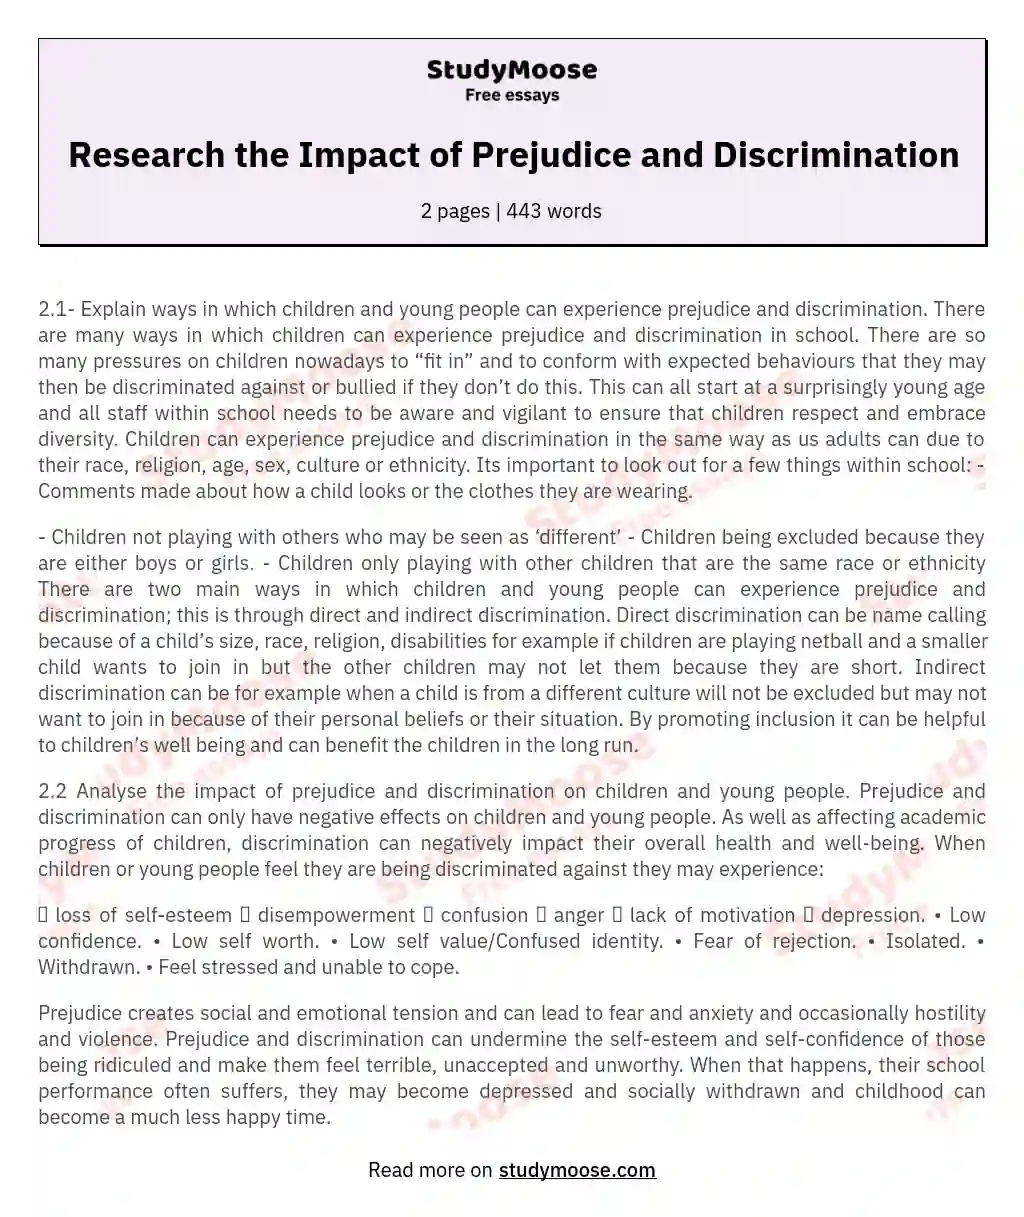 Research the Impact of Prejudice and Discrimination essay